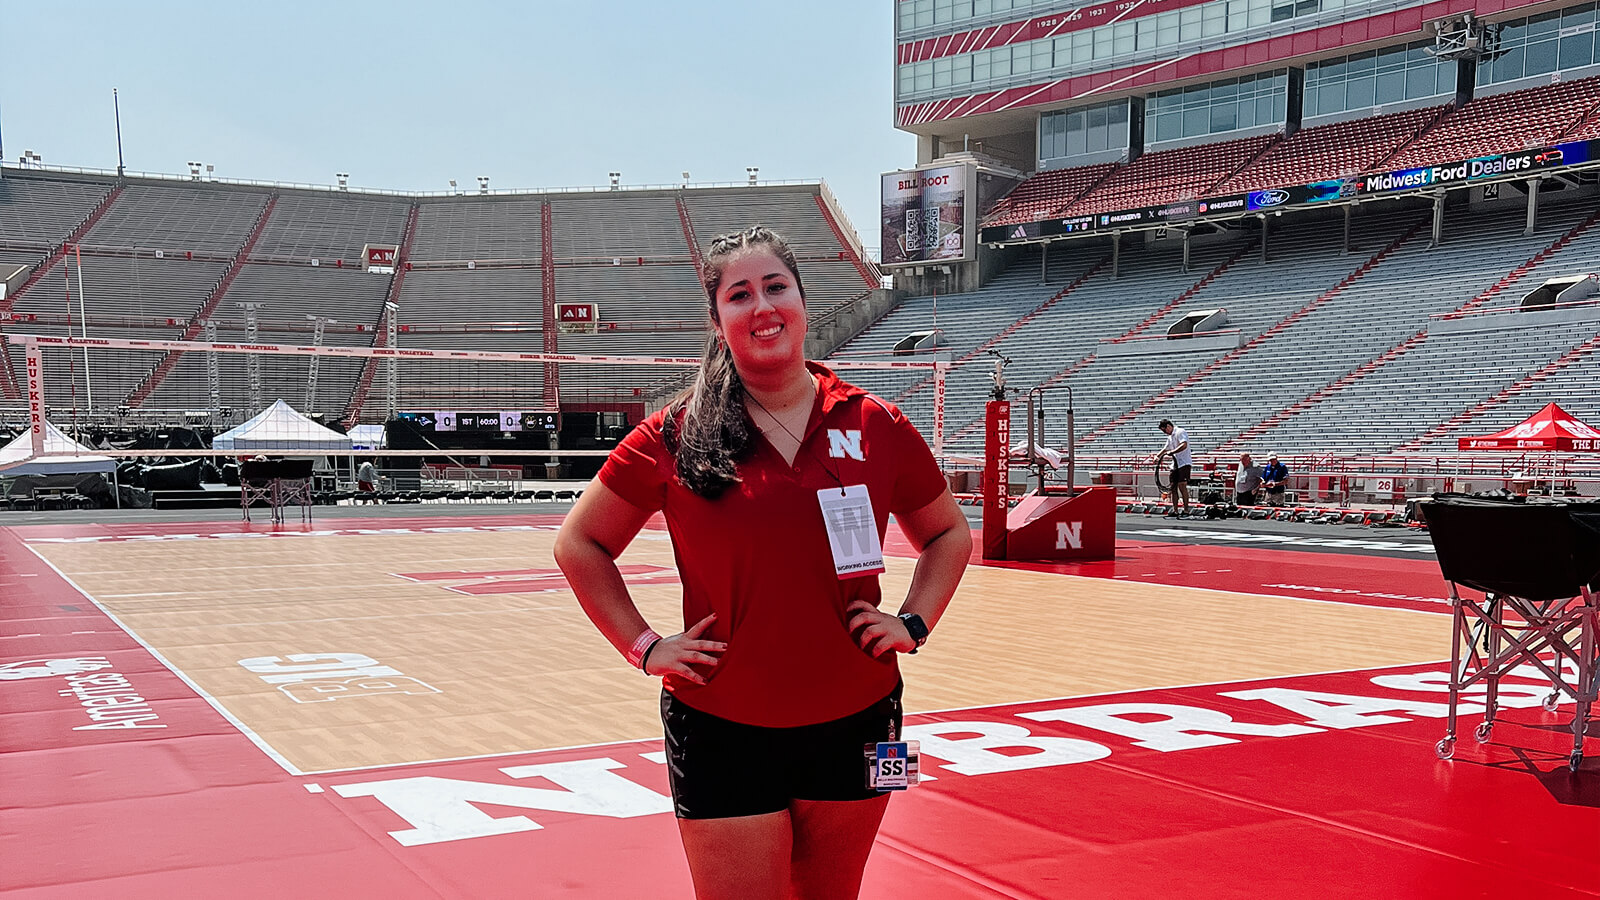 Student standing on court in Memorial Stadium for Volleyball Day